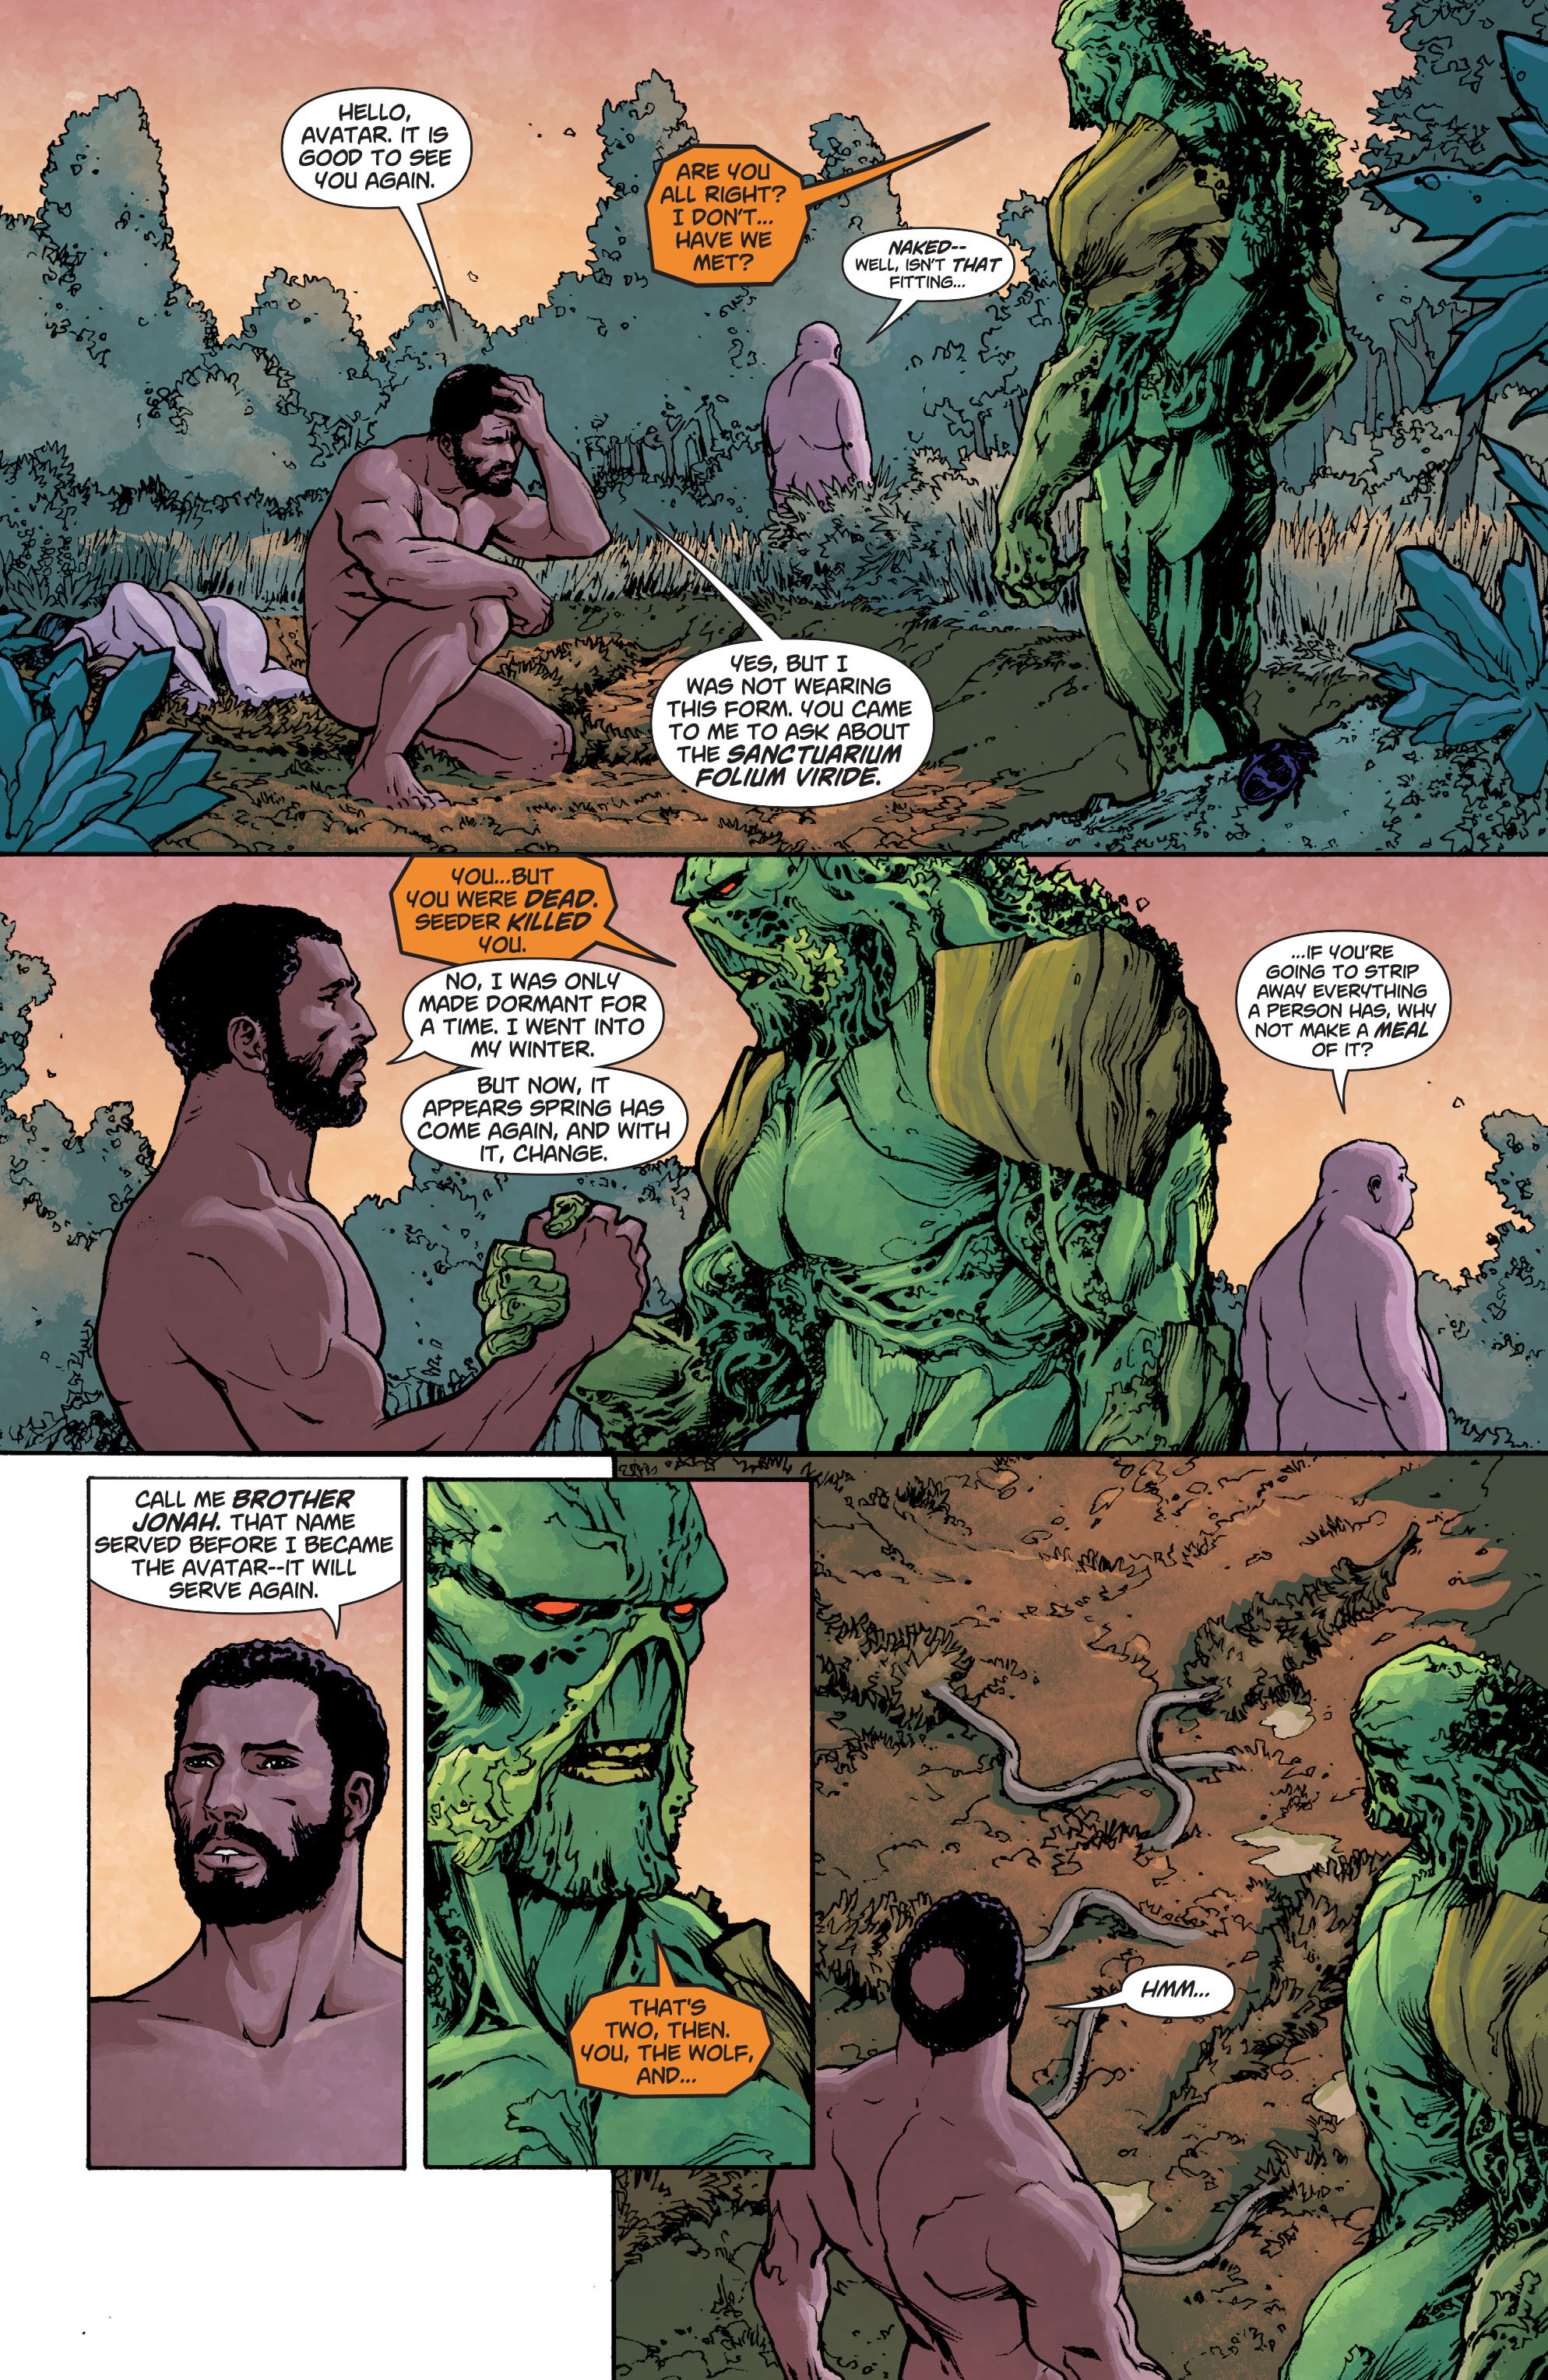 Swamp Thing Toon Xxx - Swamp Thing 2011 Issue 28 | Read Swamp Thing 2011 Issue 28 comic online in  high quality. Read Full Comic online for free - Read comics online in high  quality .|viewcomiconline.com